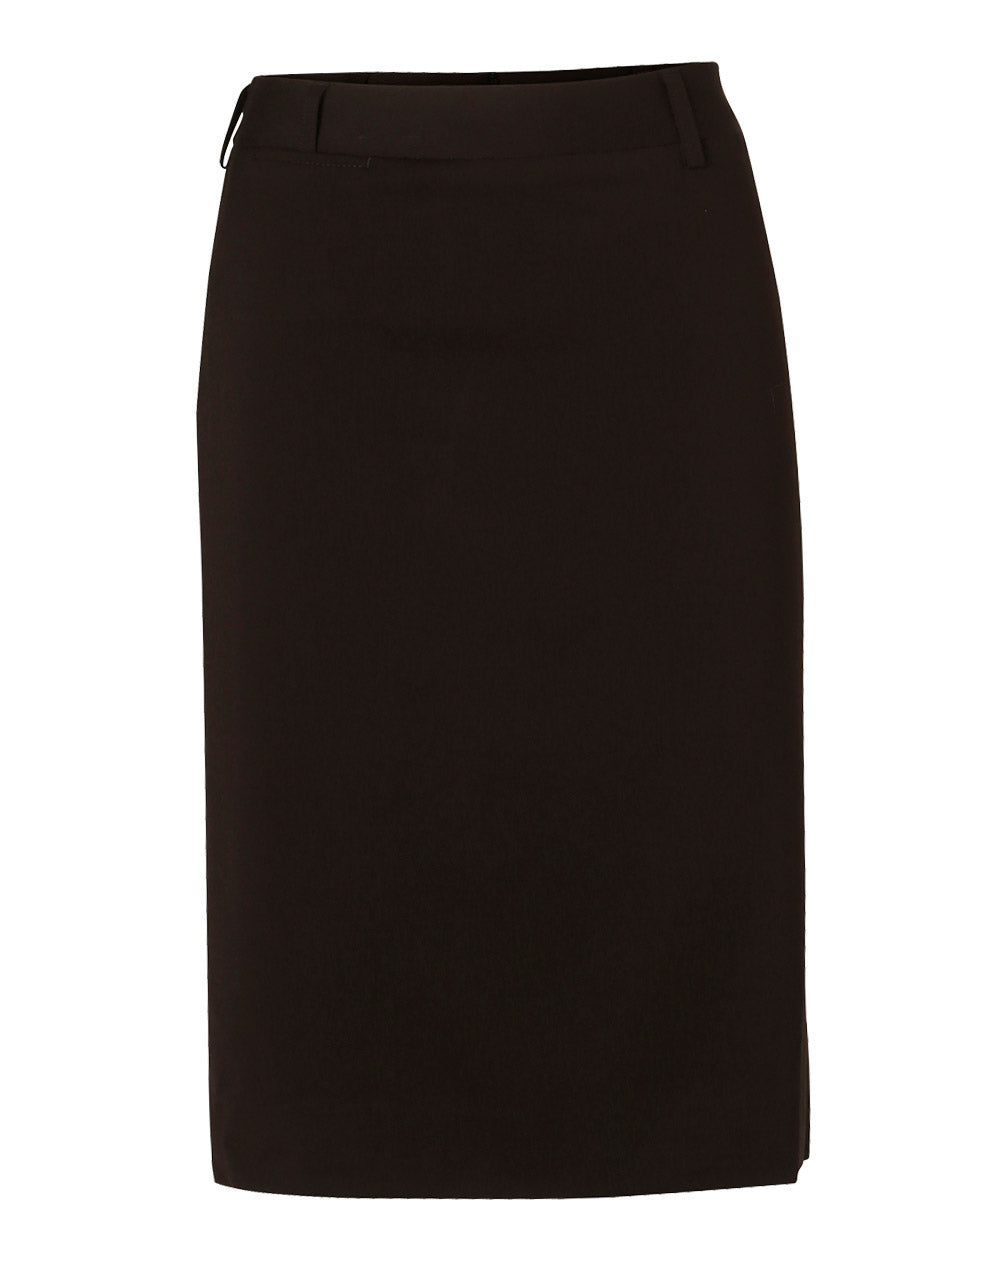 JCM9471 Women's Poly/Viscose Stretch Mid Length Lined Pencil Skirt